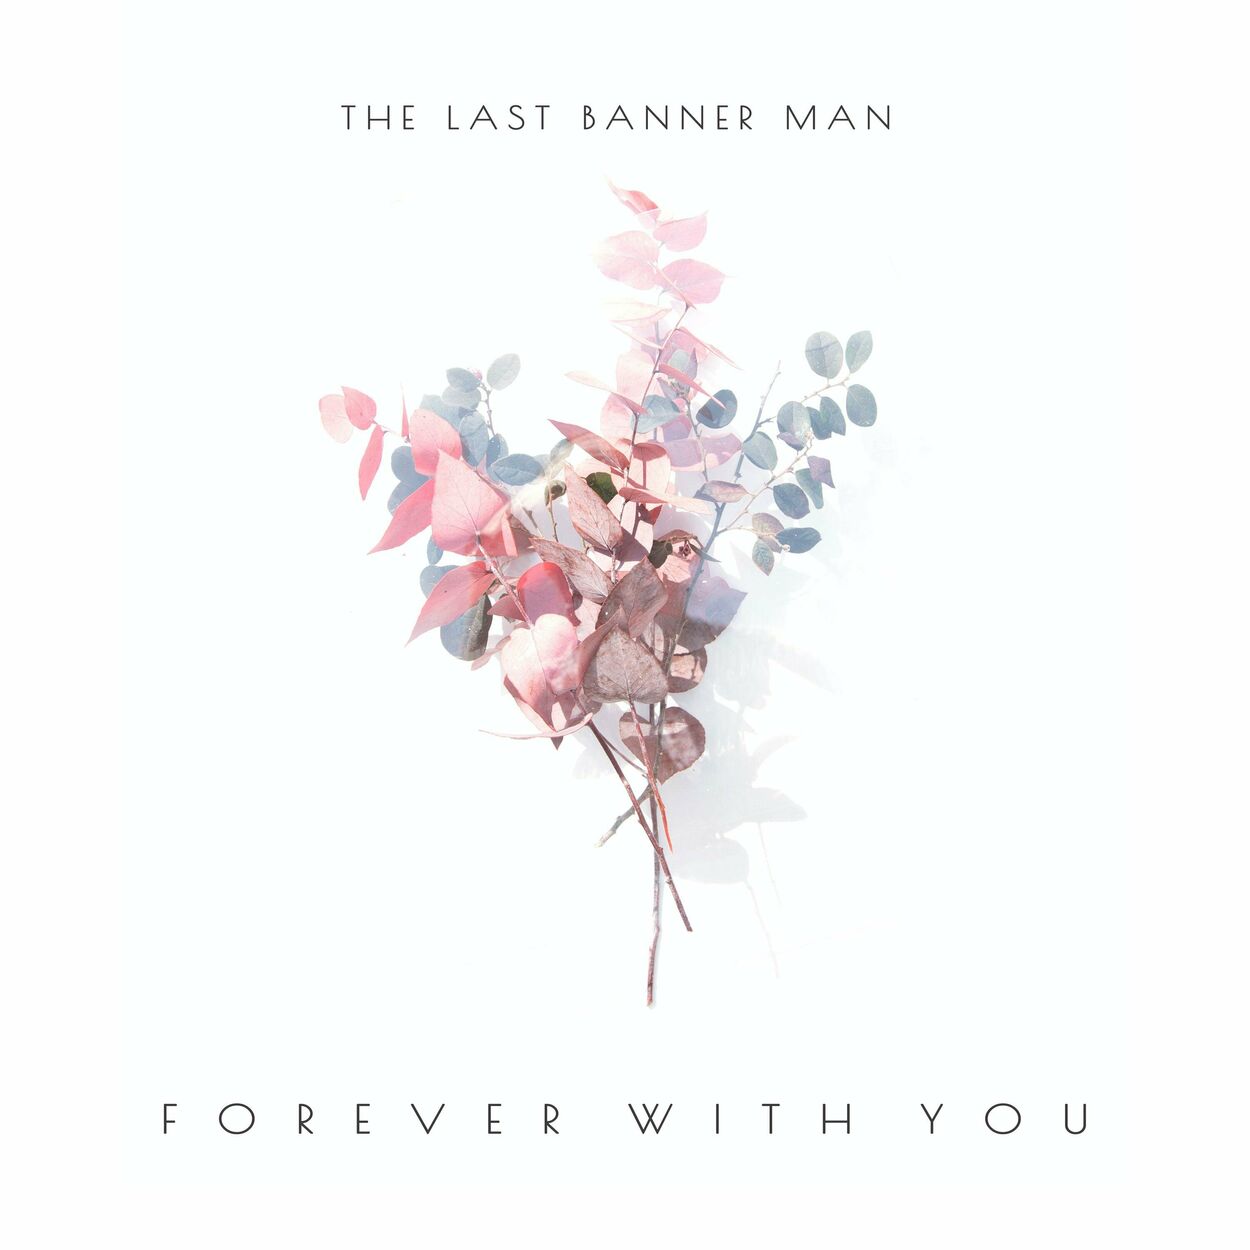 THE LAST BANNER MAN – Forever with you – Single